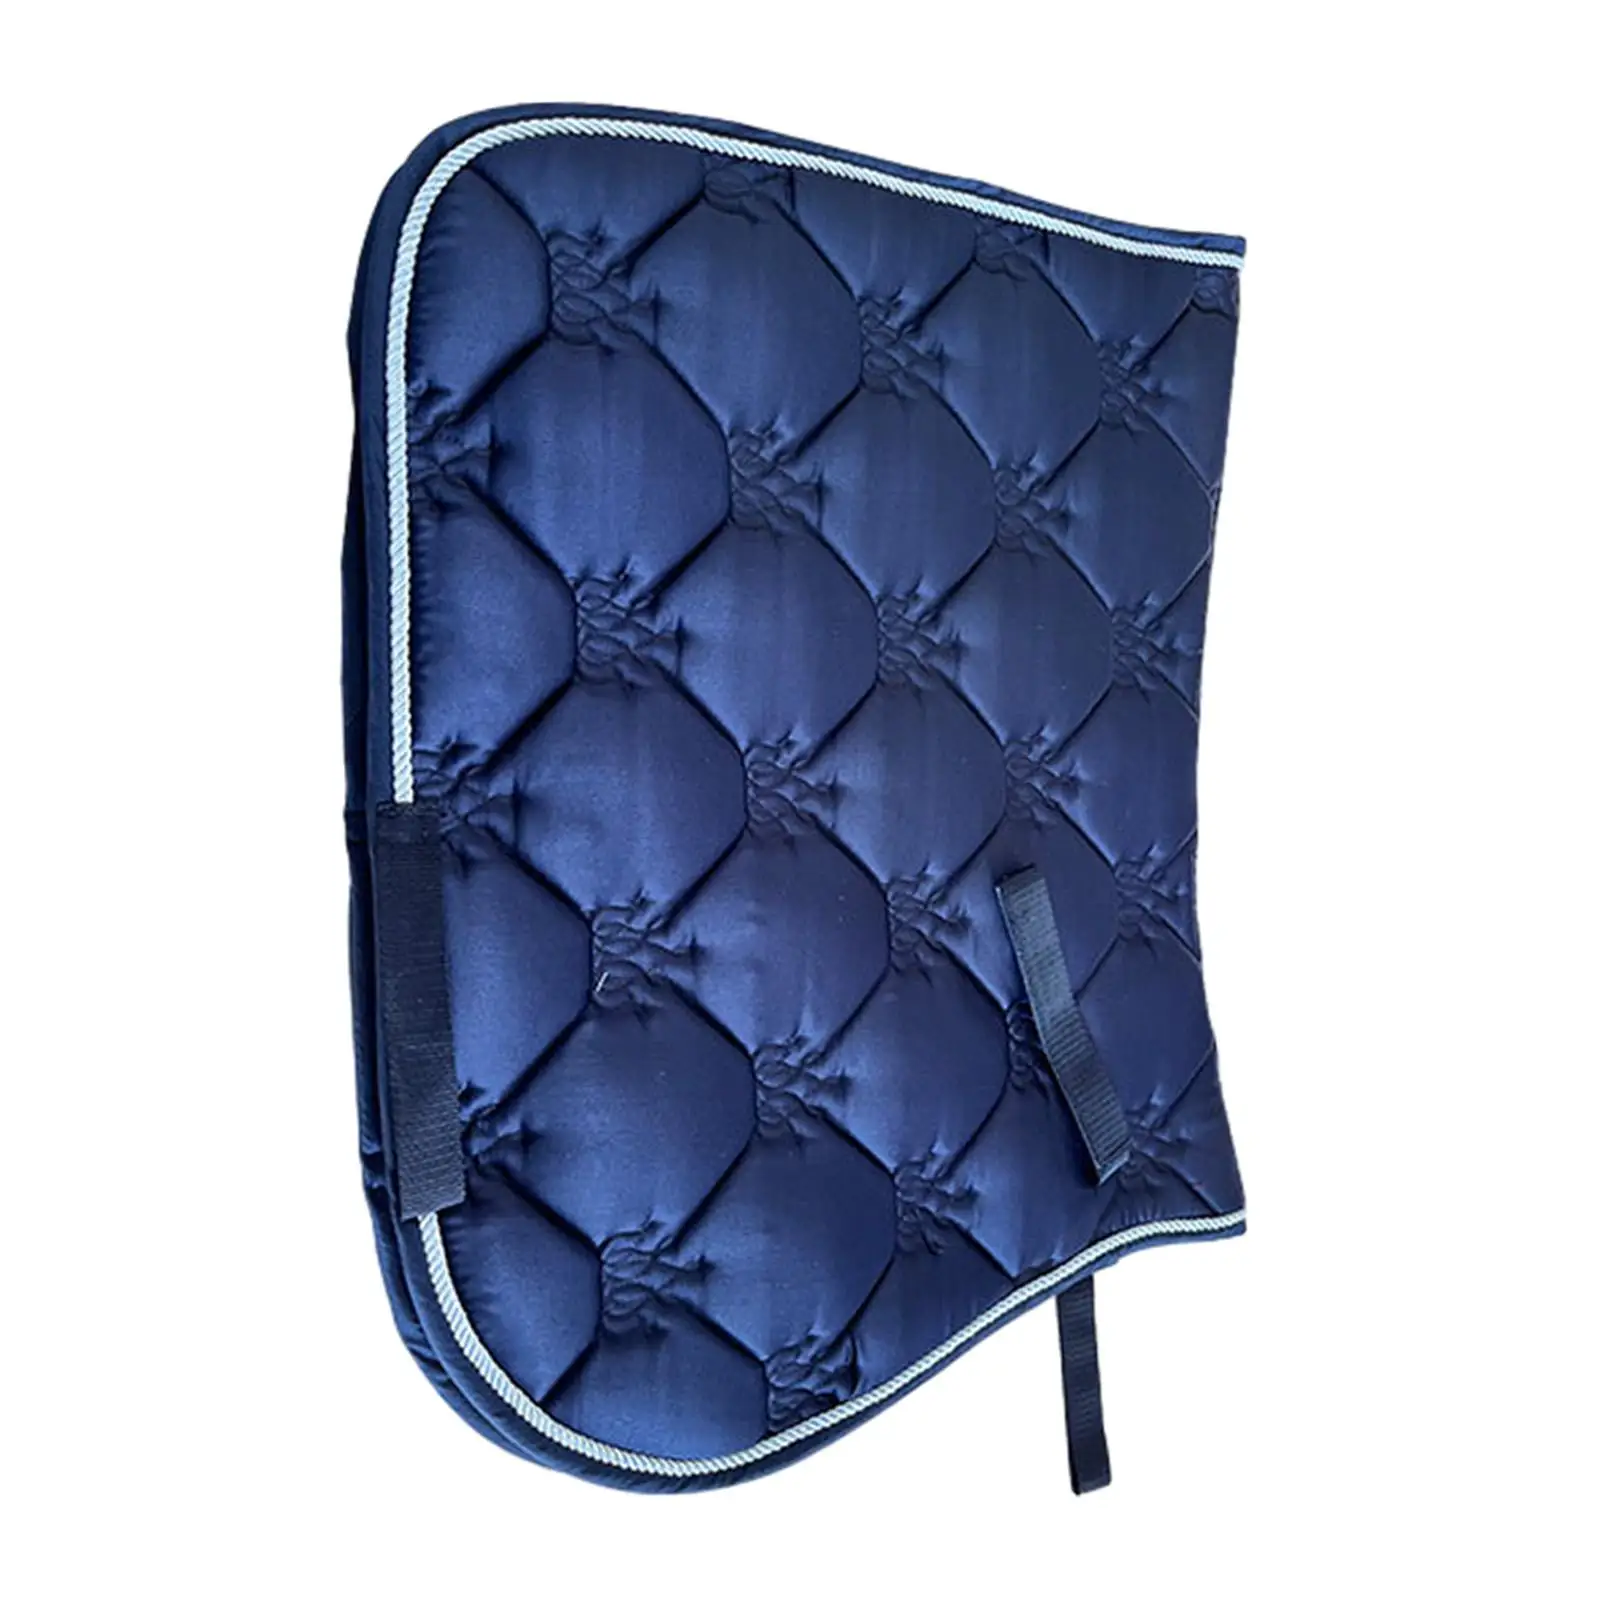 Horse Riding Pad Thickened Equestrian Riding Equipment Breathable Shock Absorbing Protection Seat Cushion Riding Western Comfort